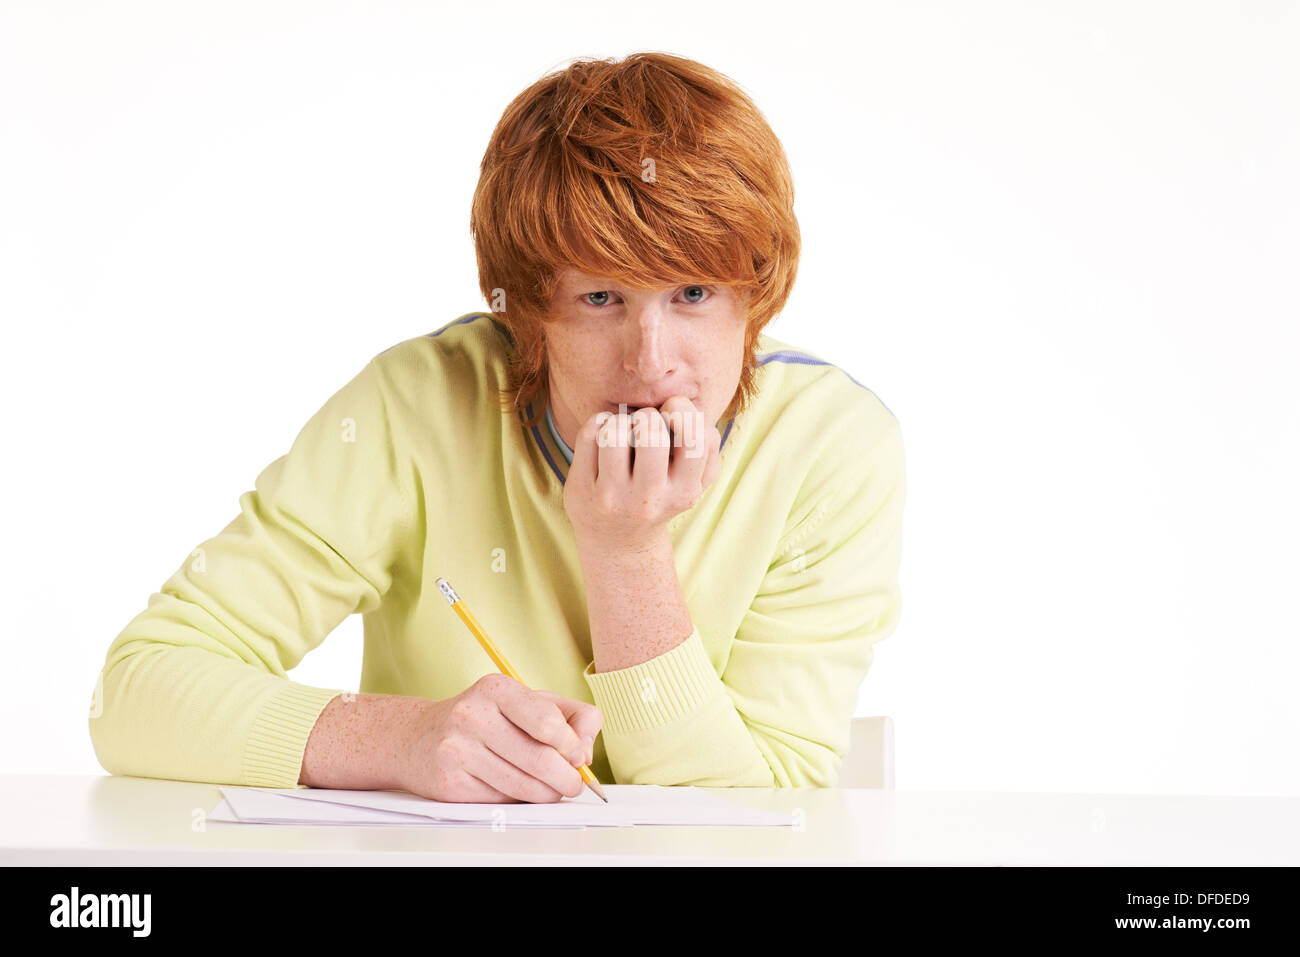 Portrait of redhead student making notes and looking at camera Stock Photo